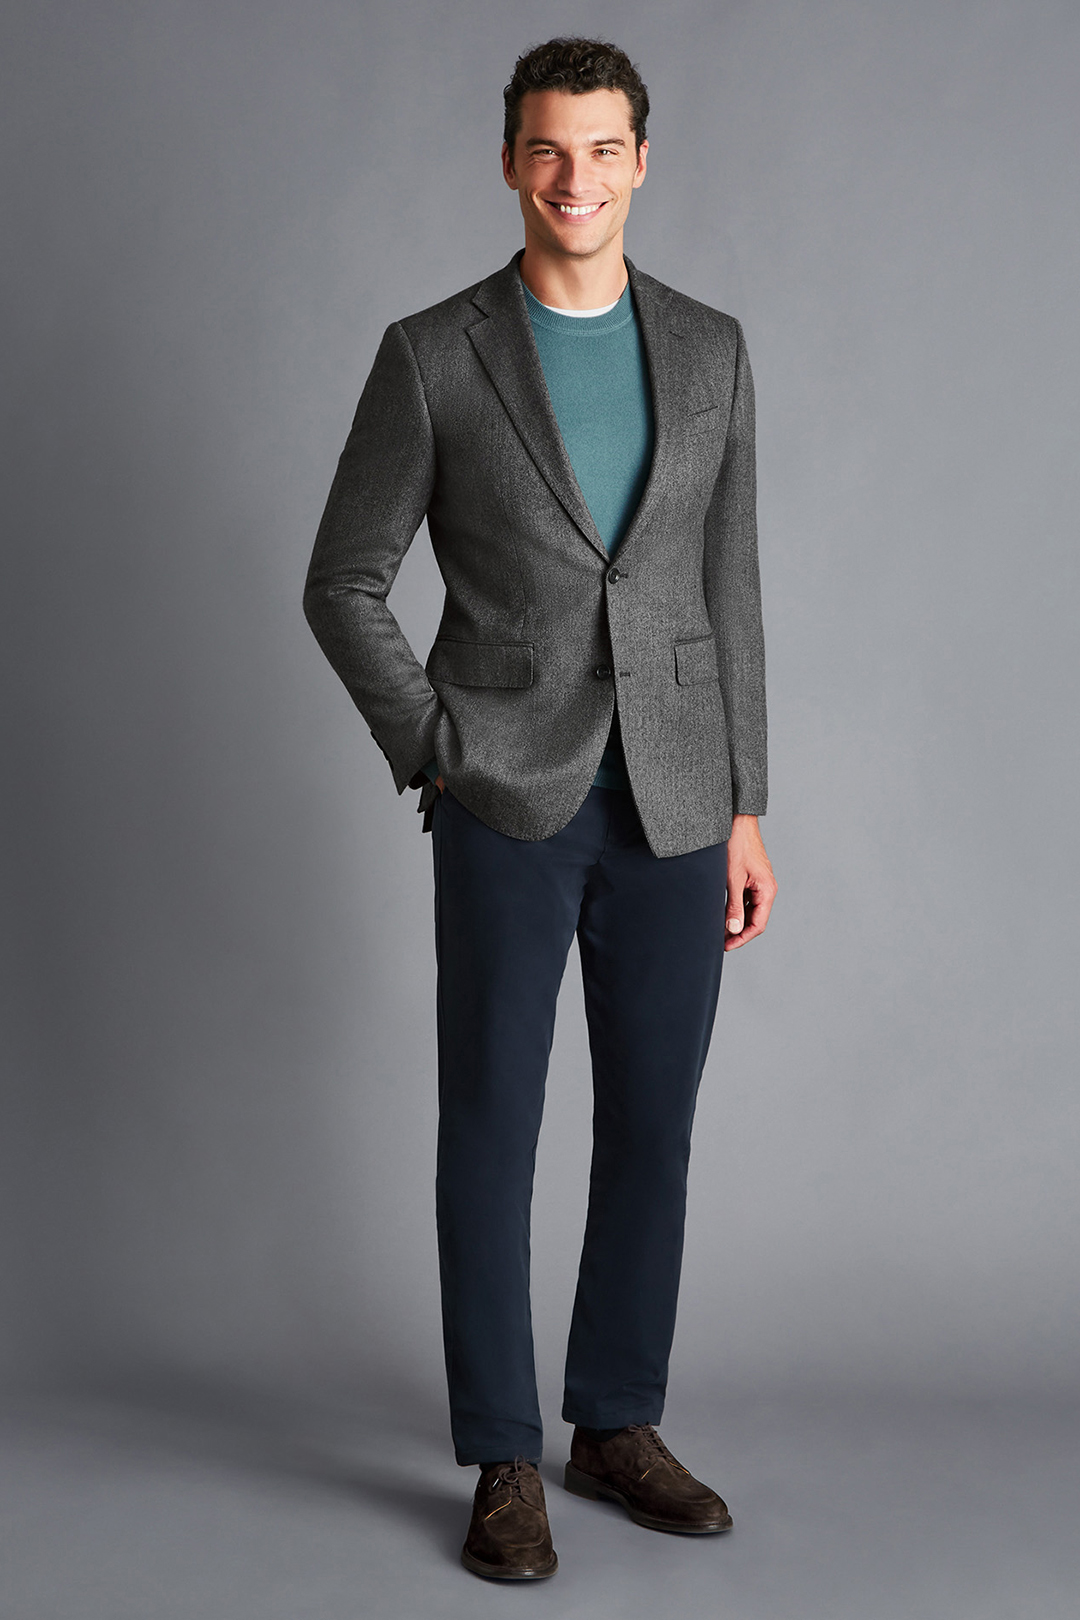 Gray blazer, blue sweater, navy pants, and brown suede derby shoes outfit